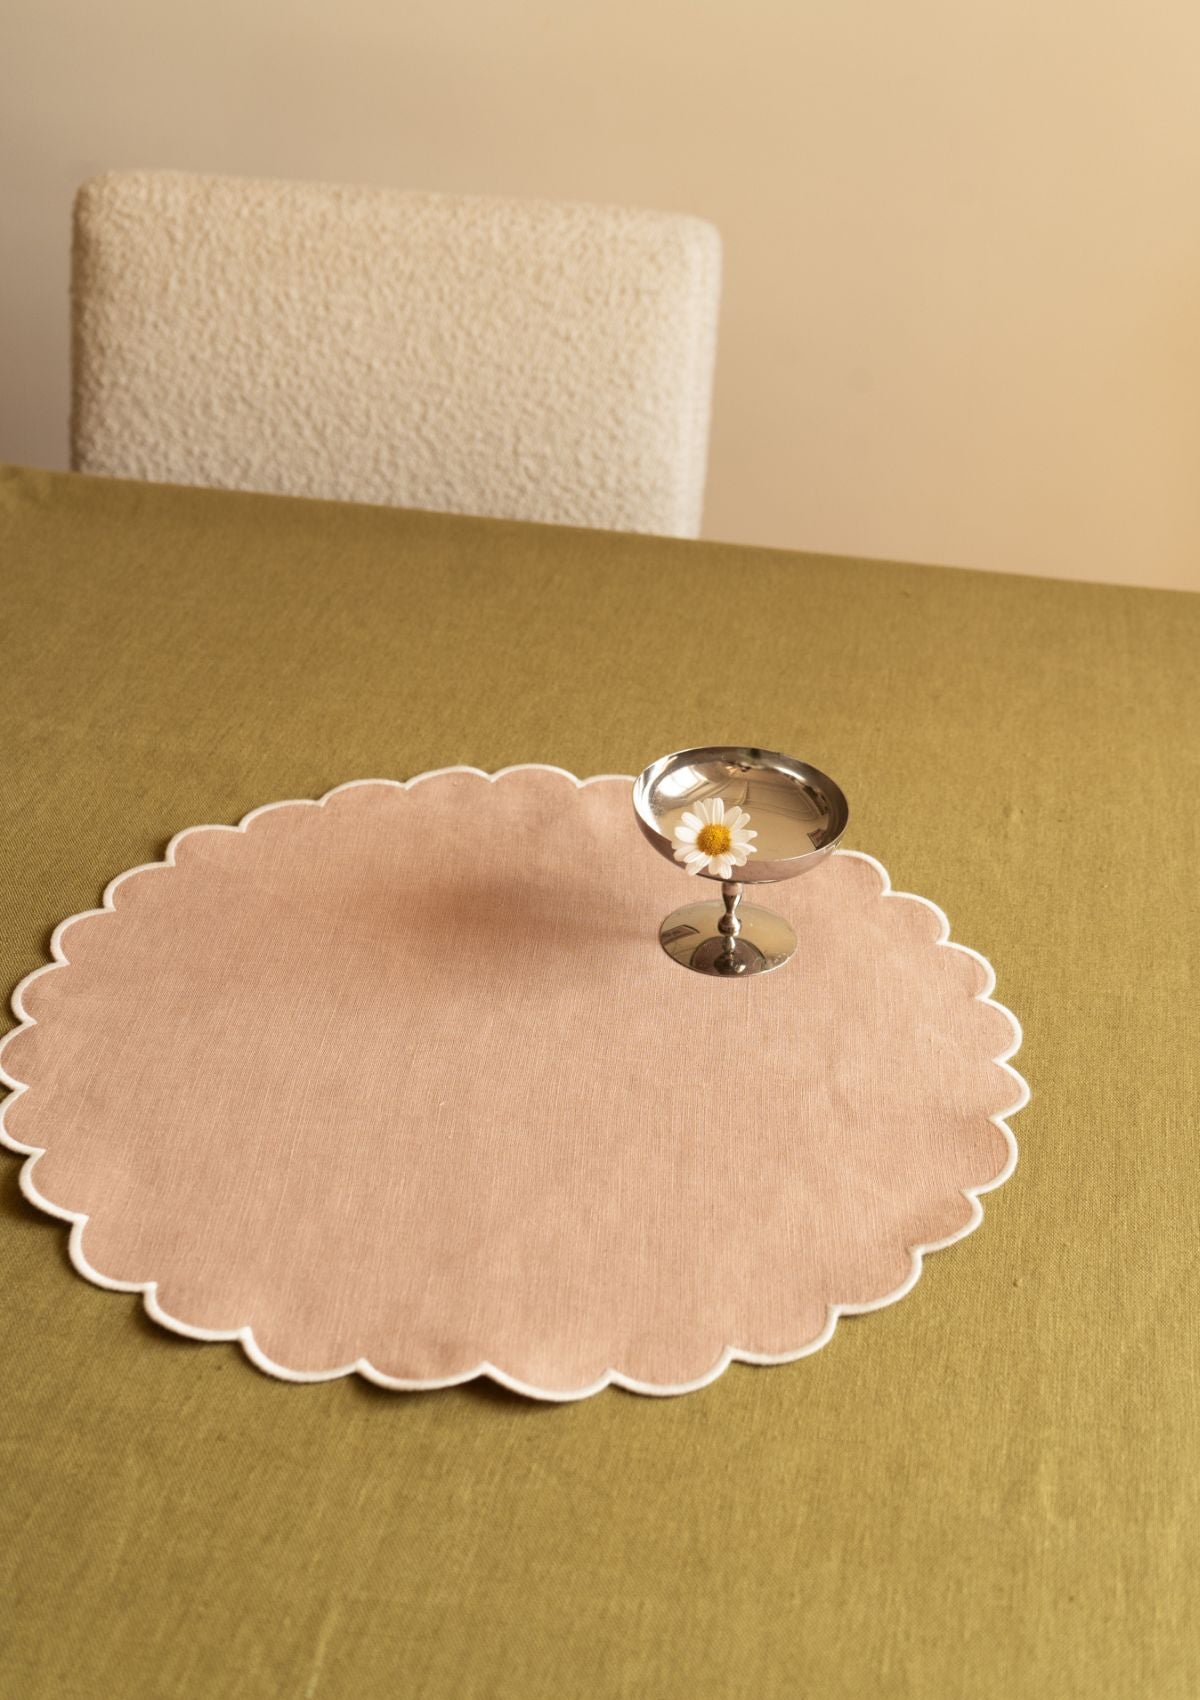 Scalloped round placemats in Powder pink & White linen